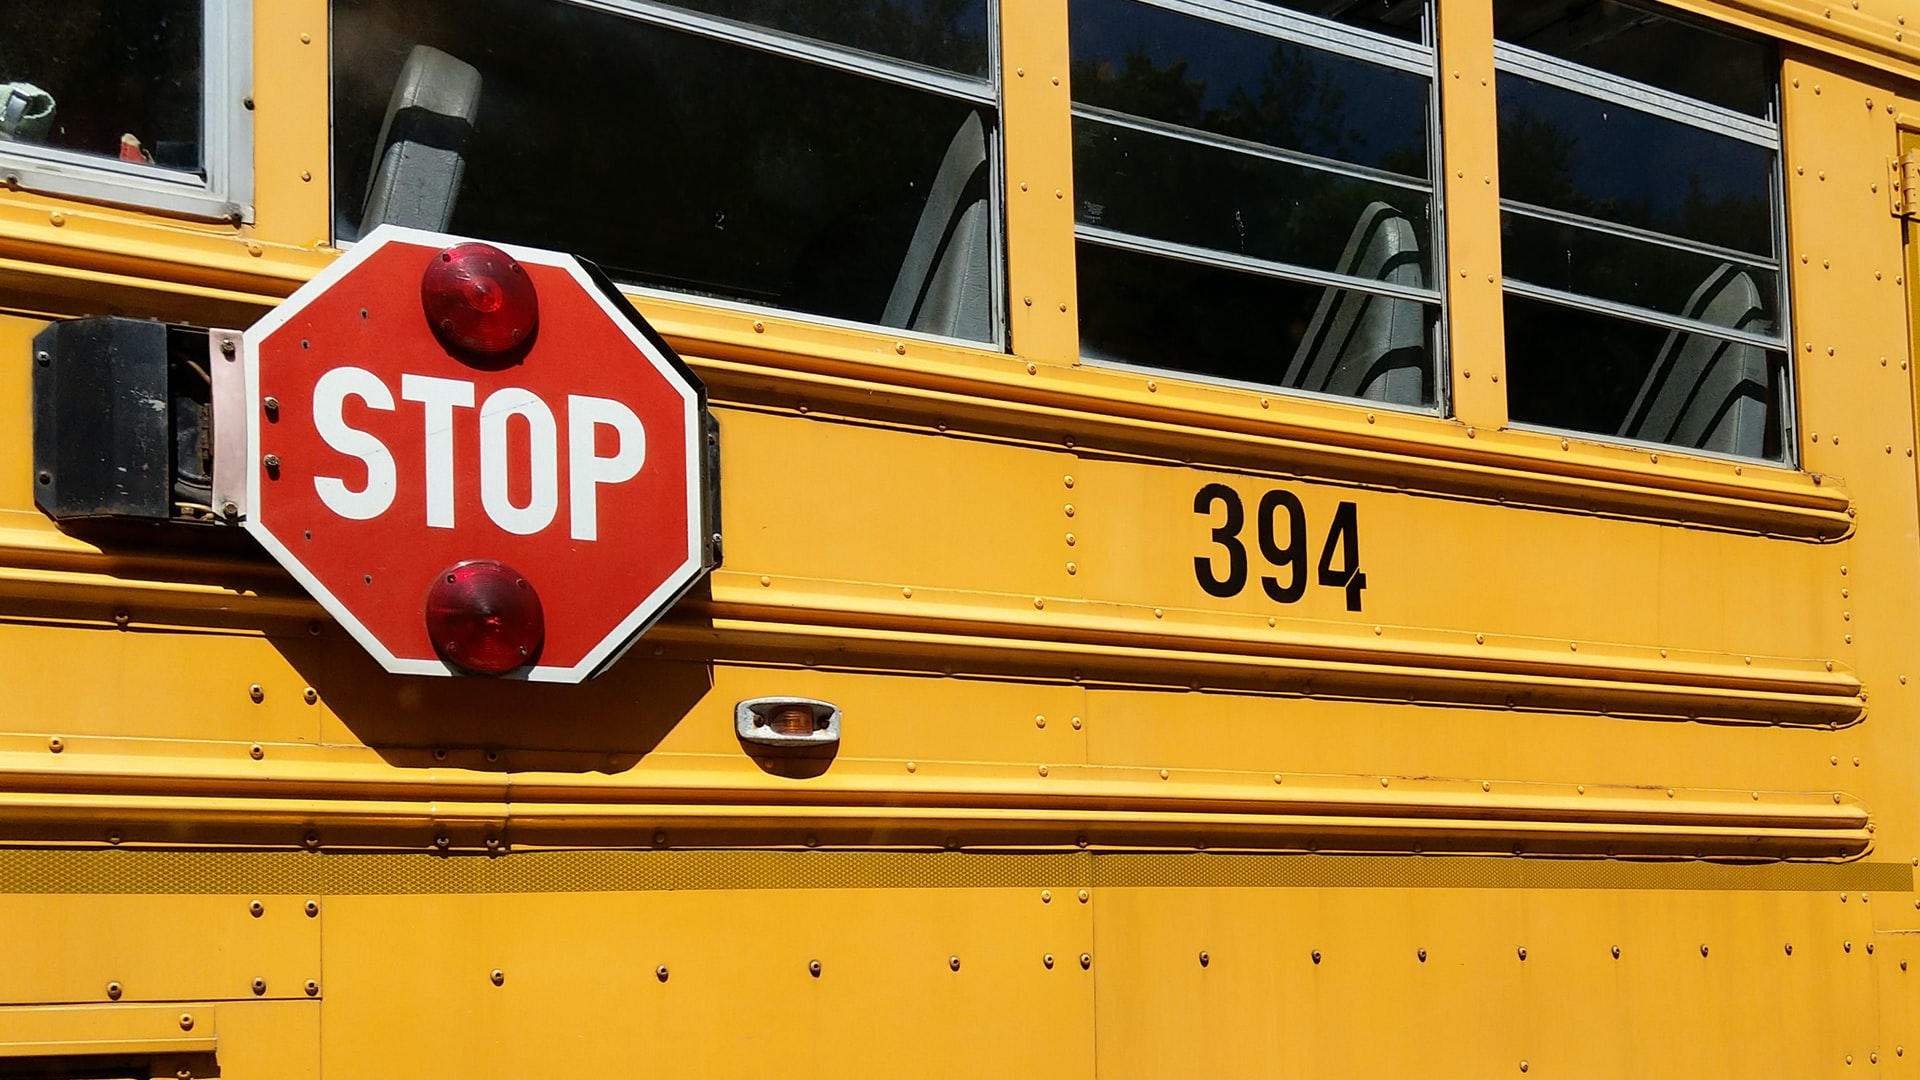 school bus stop sign representing Ontario potentially using cameras to increase safety